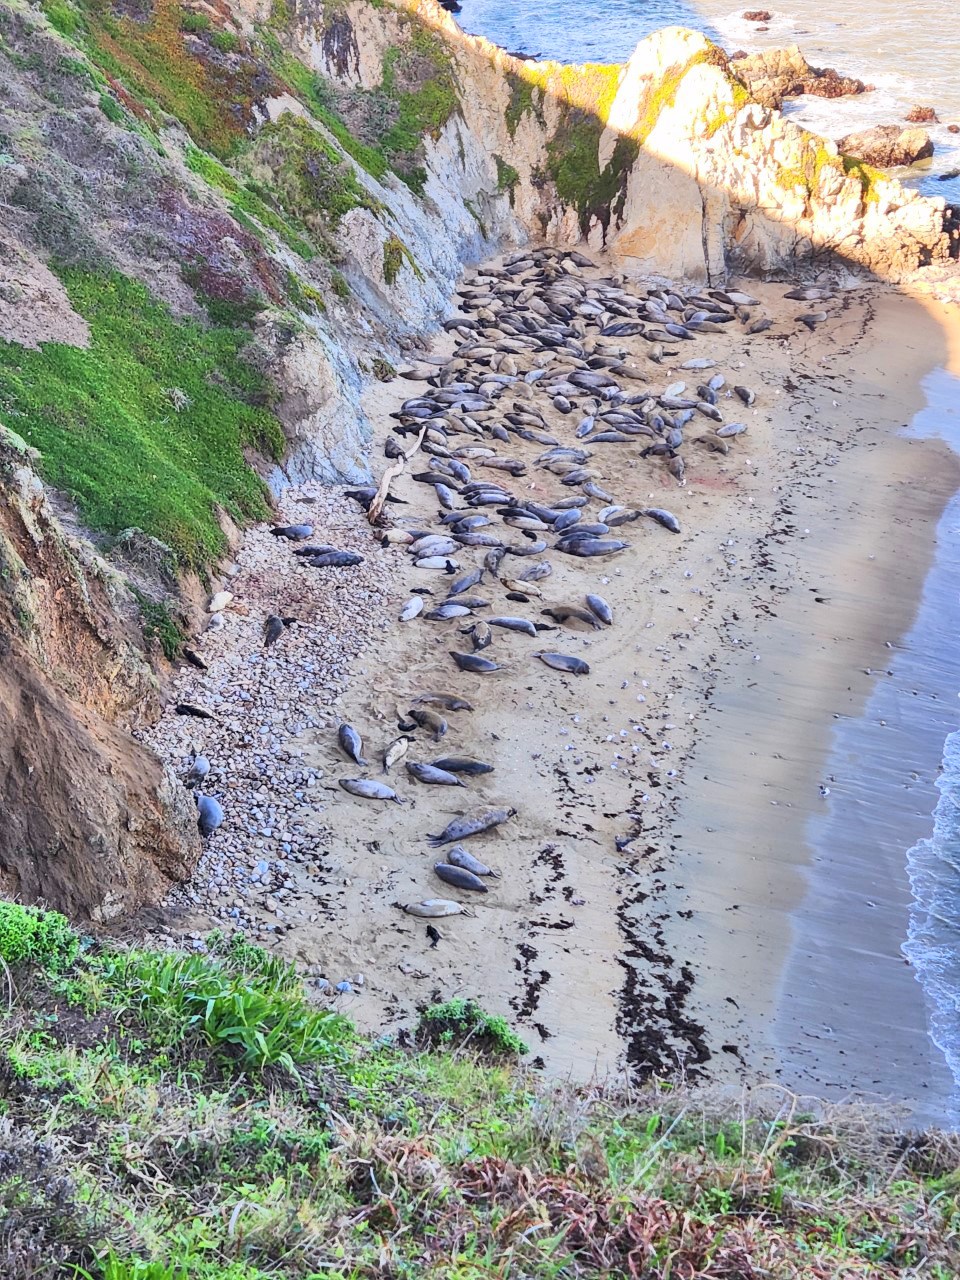 Small beach surrounded by cliffs with hundreds of elephant seals of all ages.